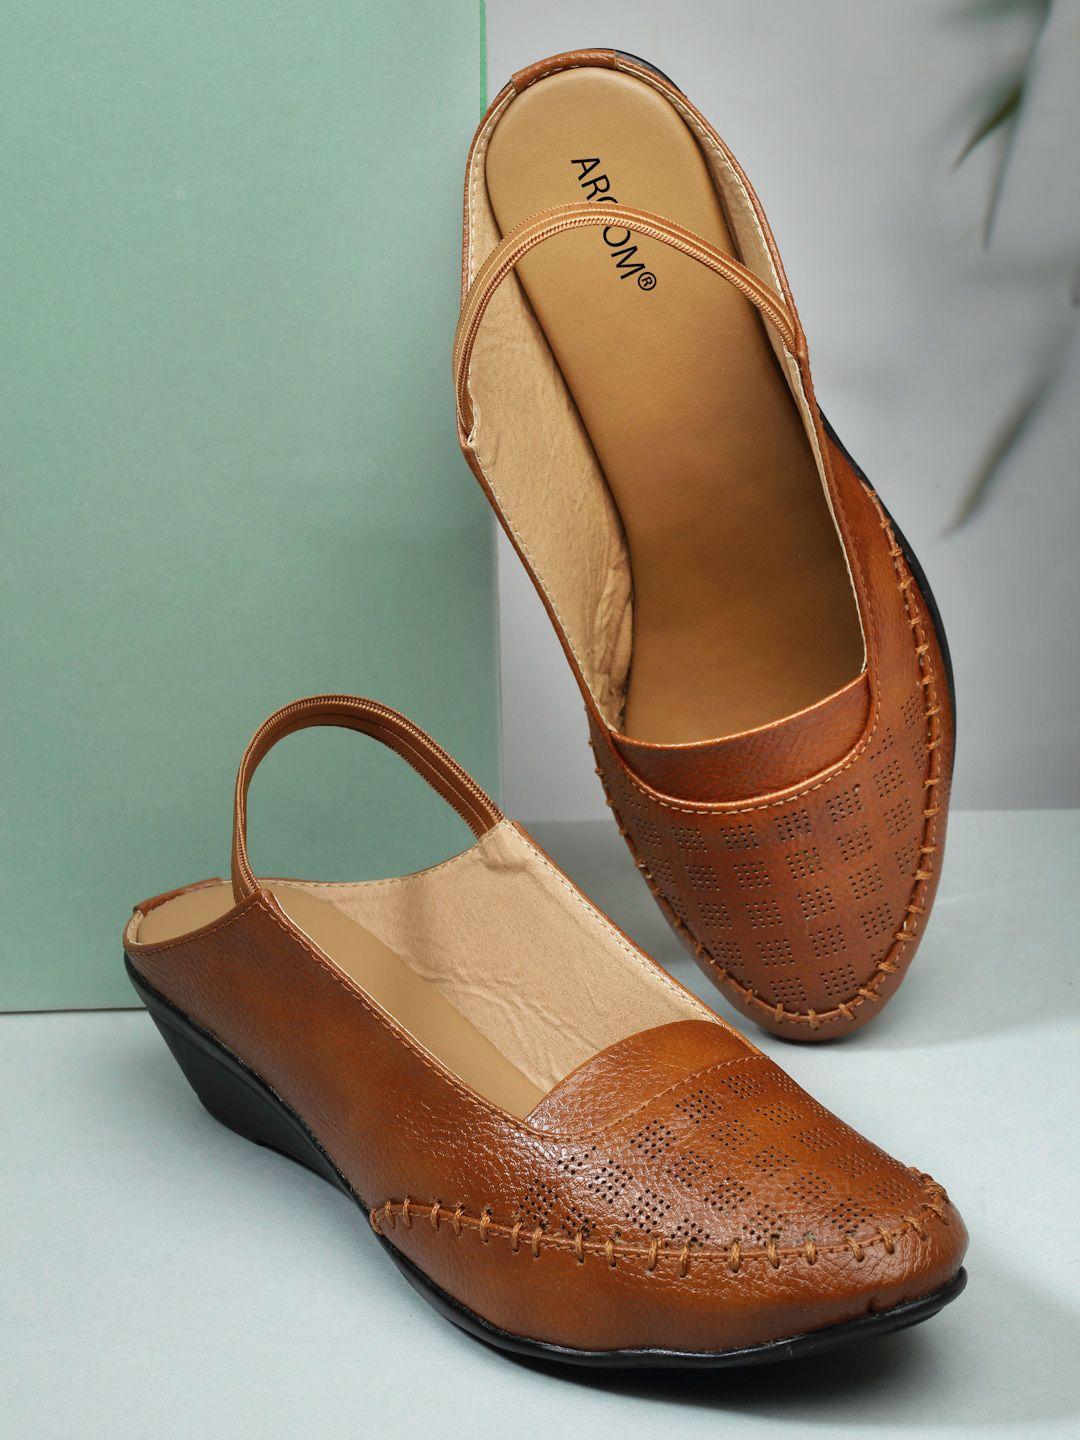 aroom-textured-leather-mules-with-backstrap